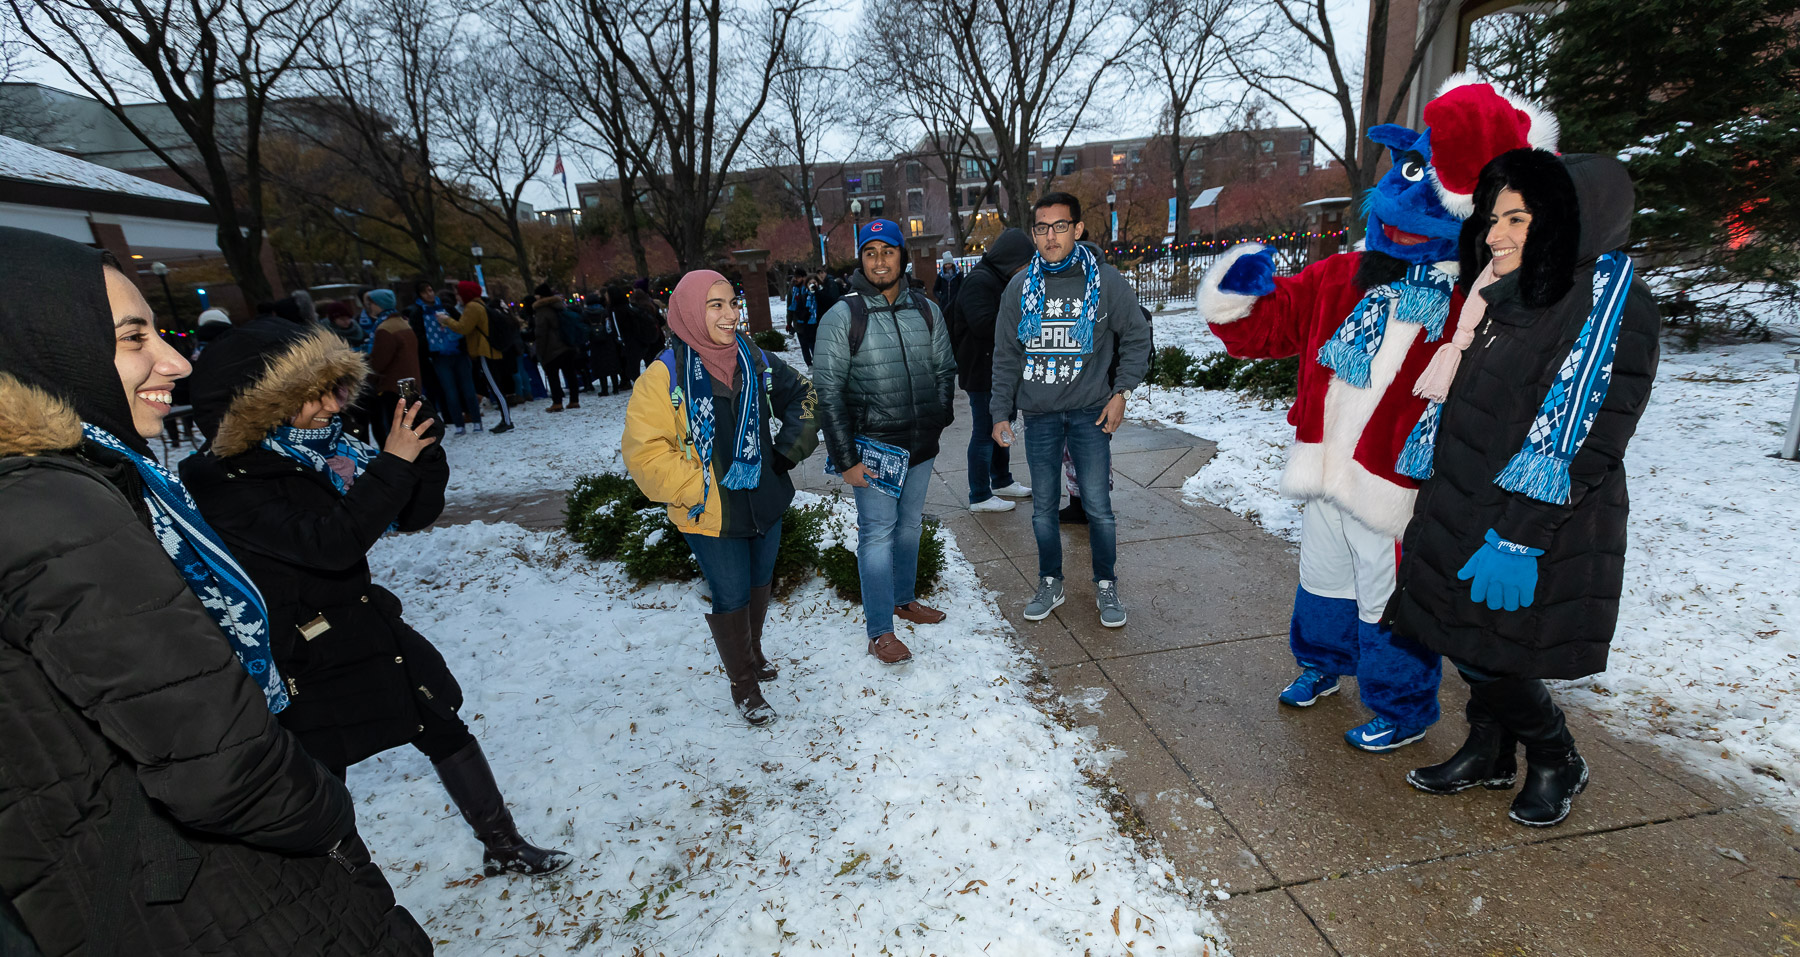 Students grab pictures with DIBS before the Tree Lighting Ceremony. (DePaul University/Jeff Carrion)